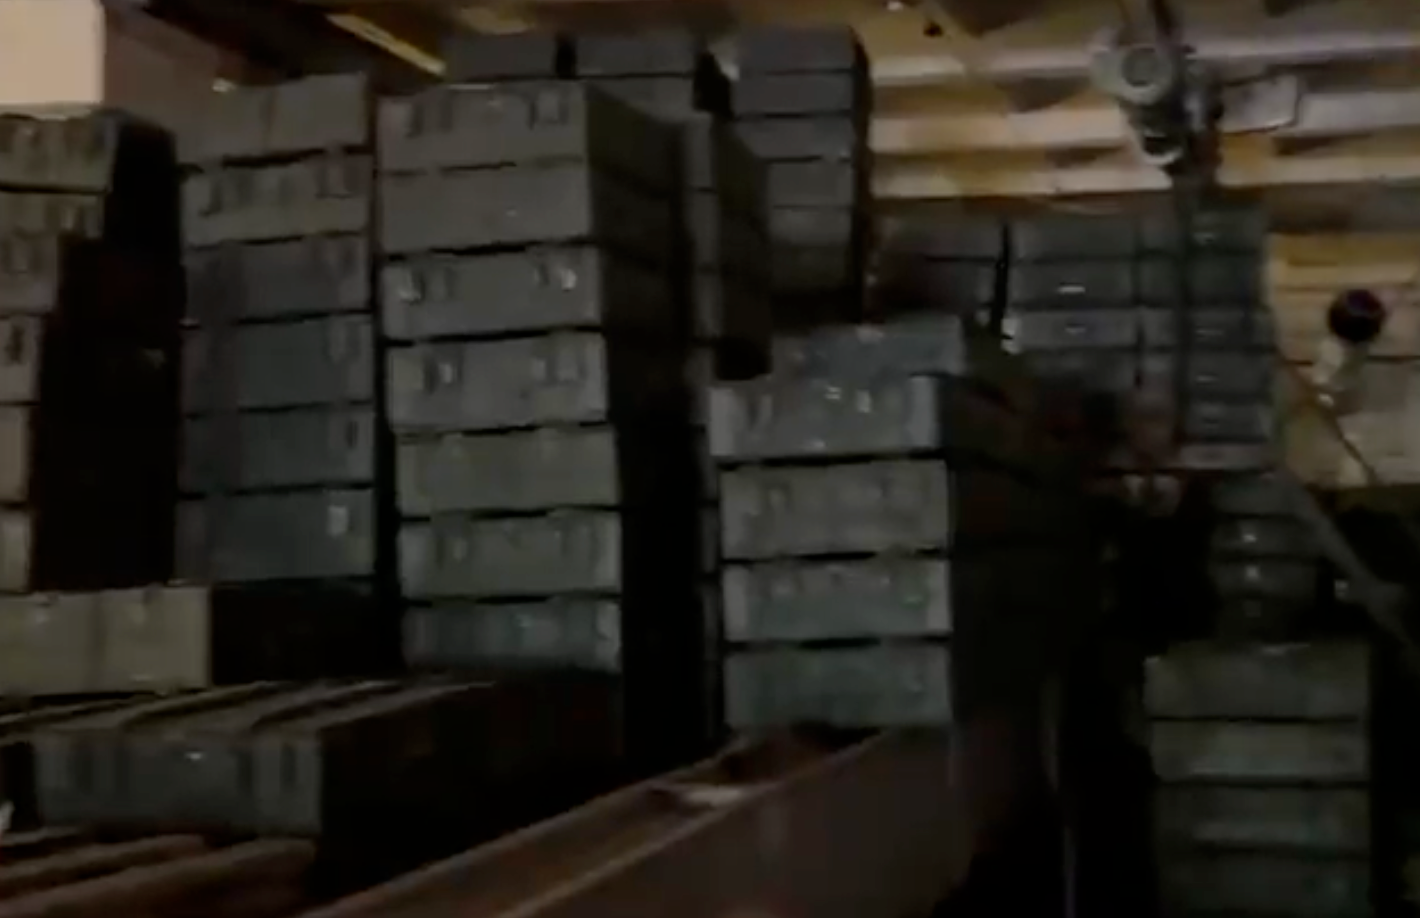 Crates of munitions.